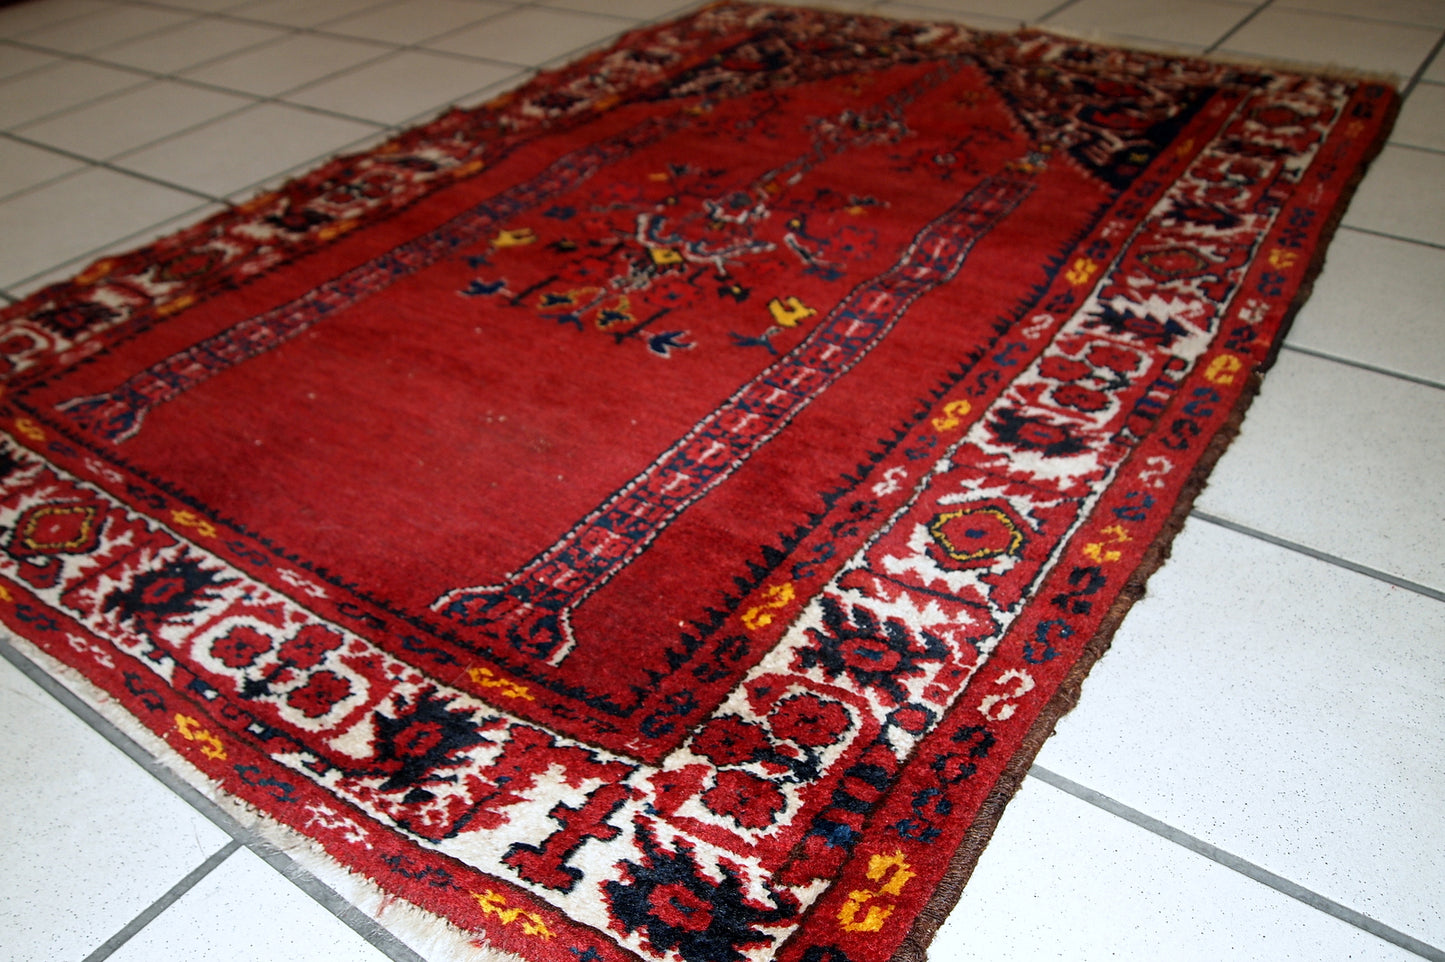 Vintage handmade Turkish prayer rug in bright red shade with yellow, white and navy blue details. The rug is in original condition, it has some low pile. Made out of soft wool. 